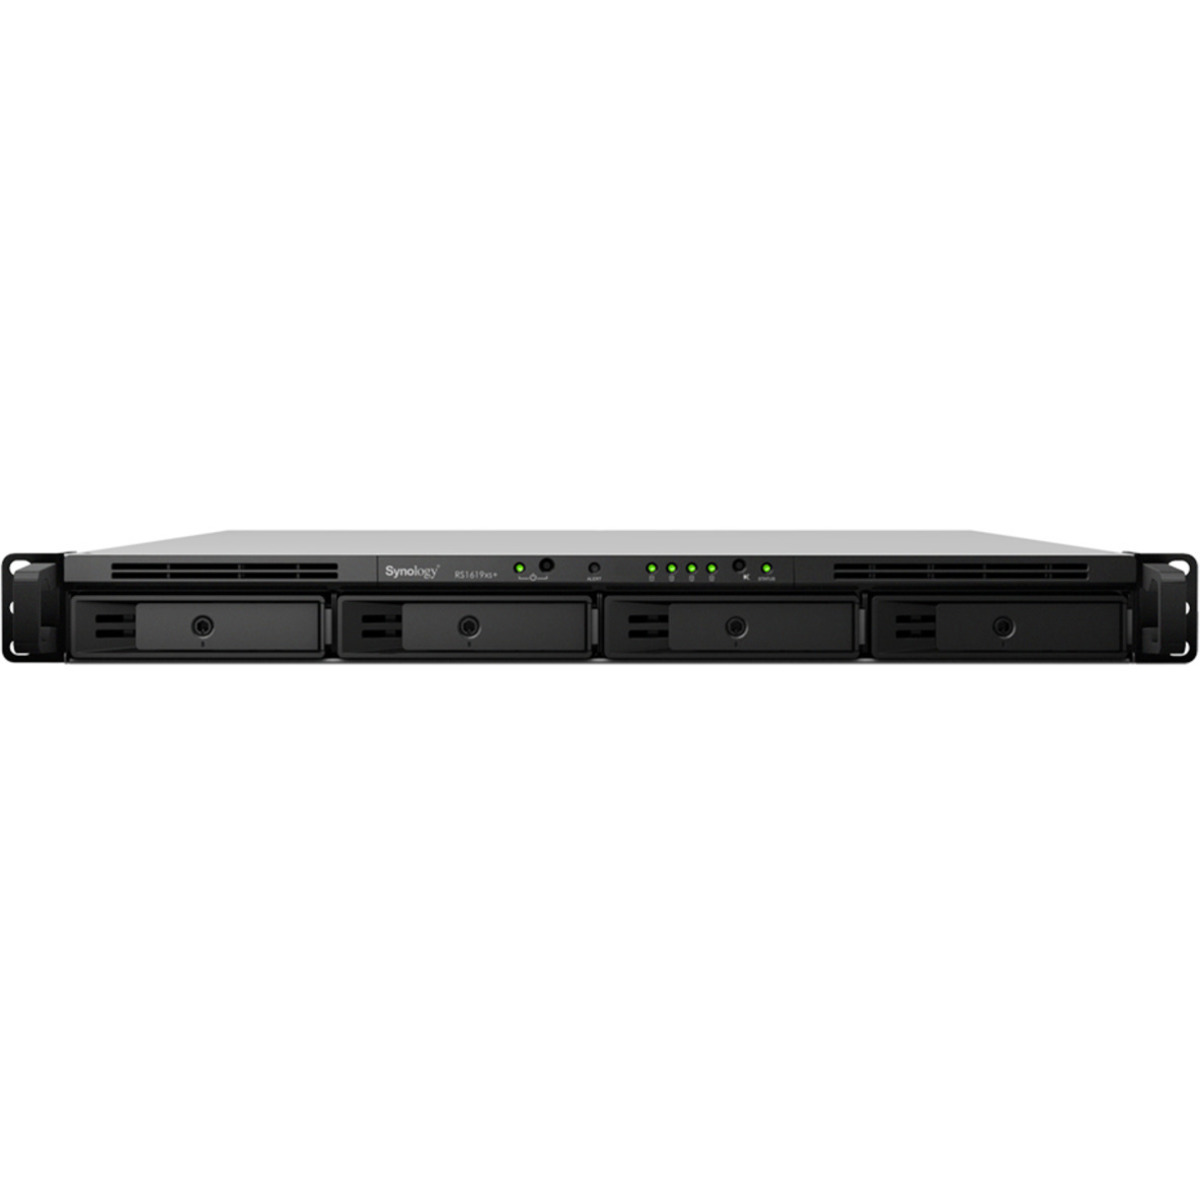 Synology RackStation RS1619xs+ 4tb 4-Bay RackMount Multimedia / Power User / Business NAS - Network Attached Storage Device 2x2tb Samsung 870 EVO MZ-77E2T0BAM 2.5 560/530MB/s SATA 6Gb/s SSD CONSUMER Class Drives Installed - Burn-In Tested RackStation RS1619xs+